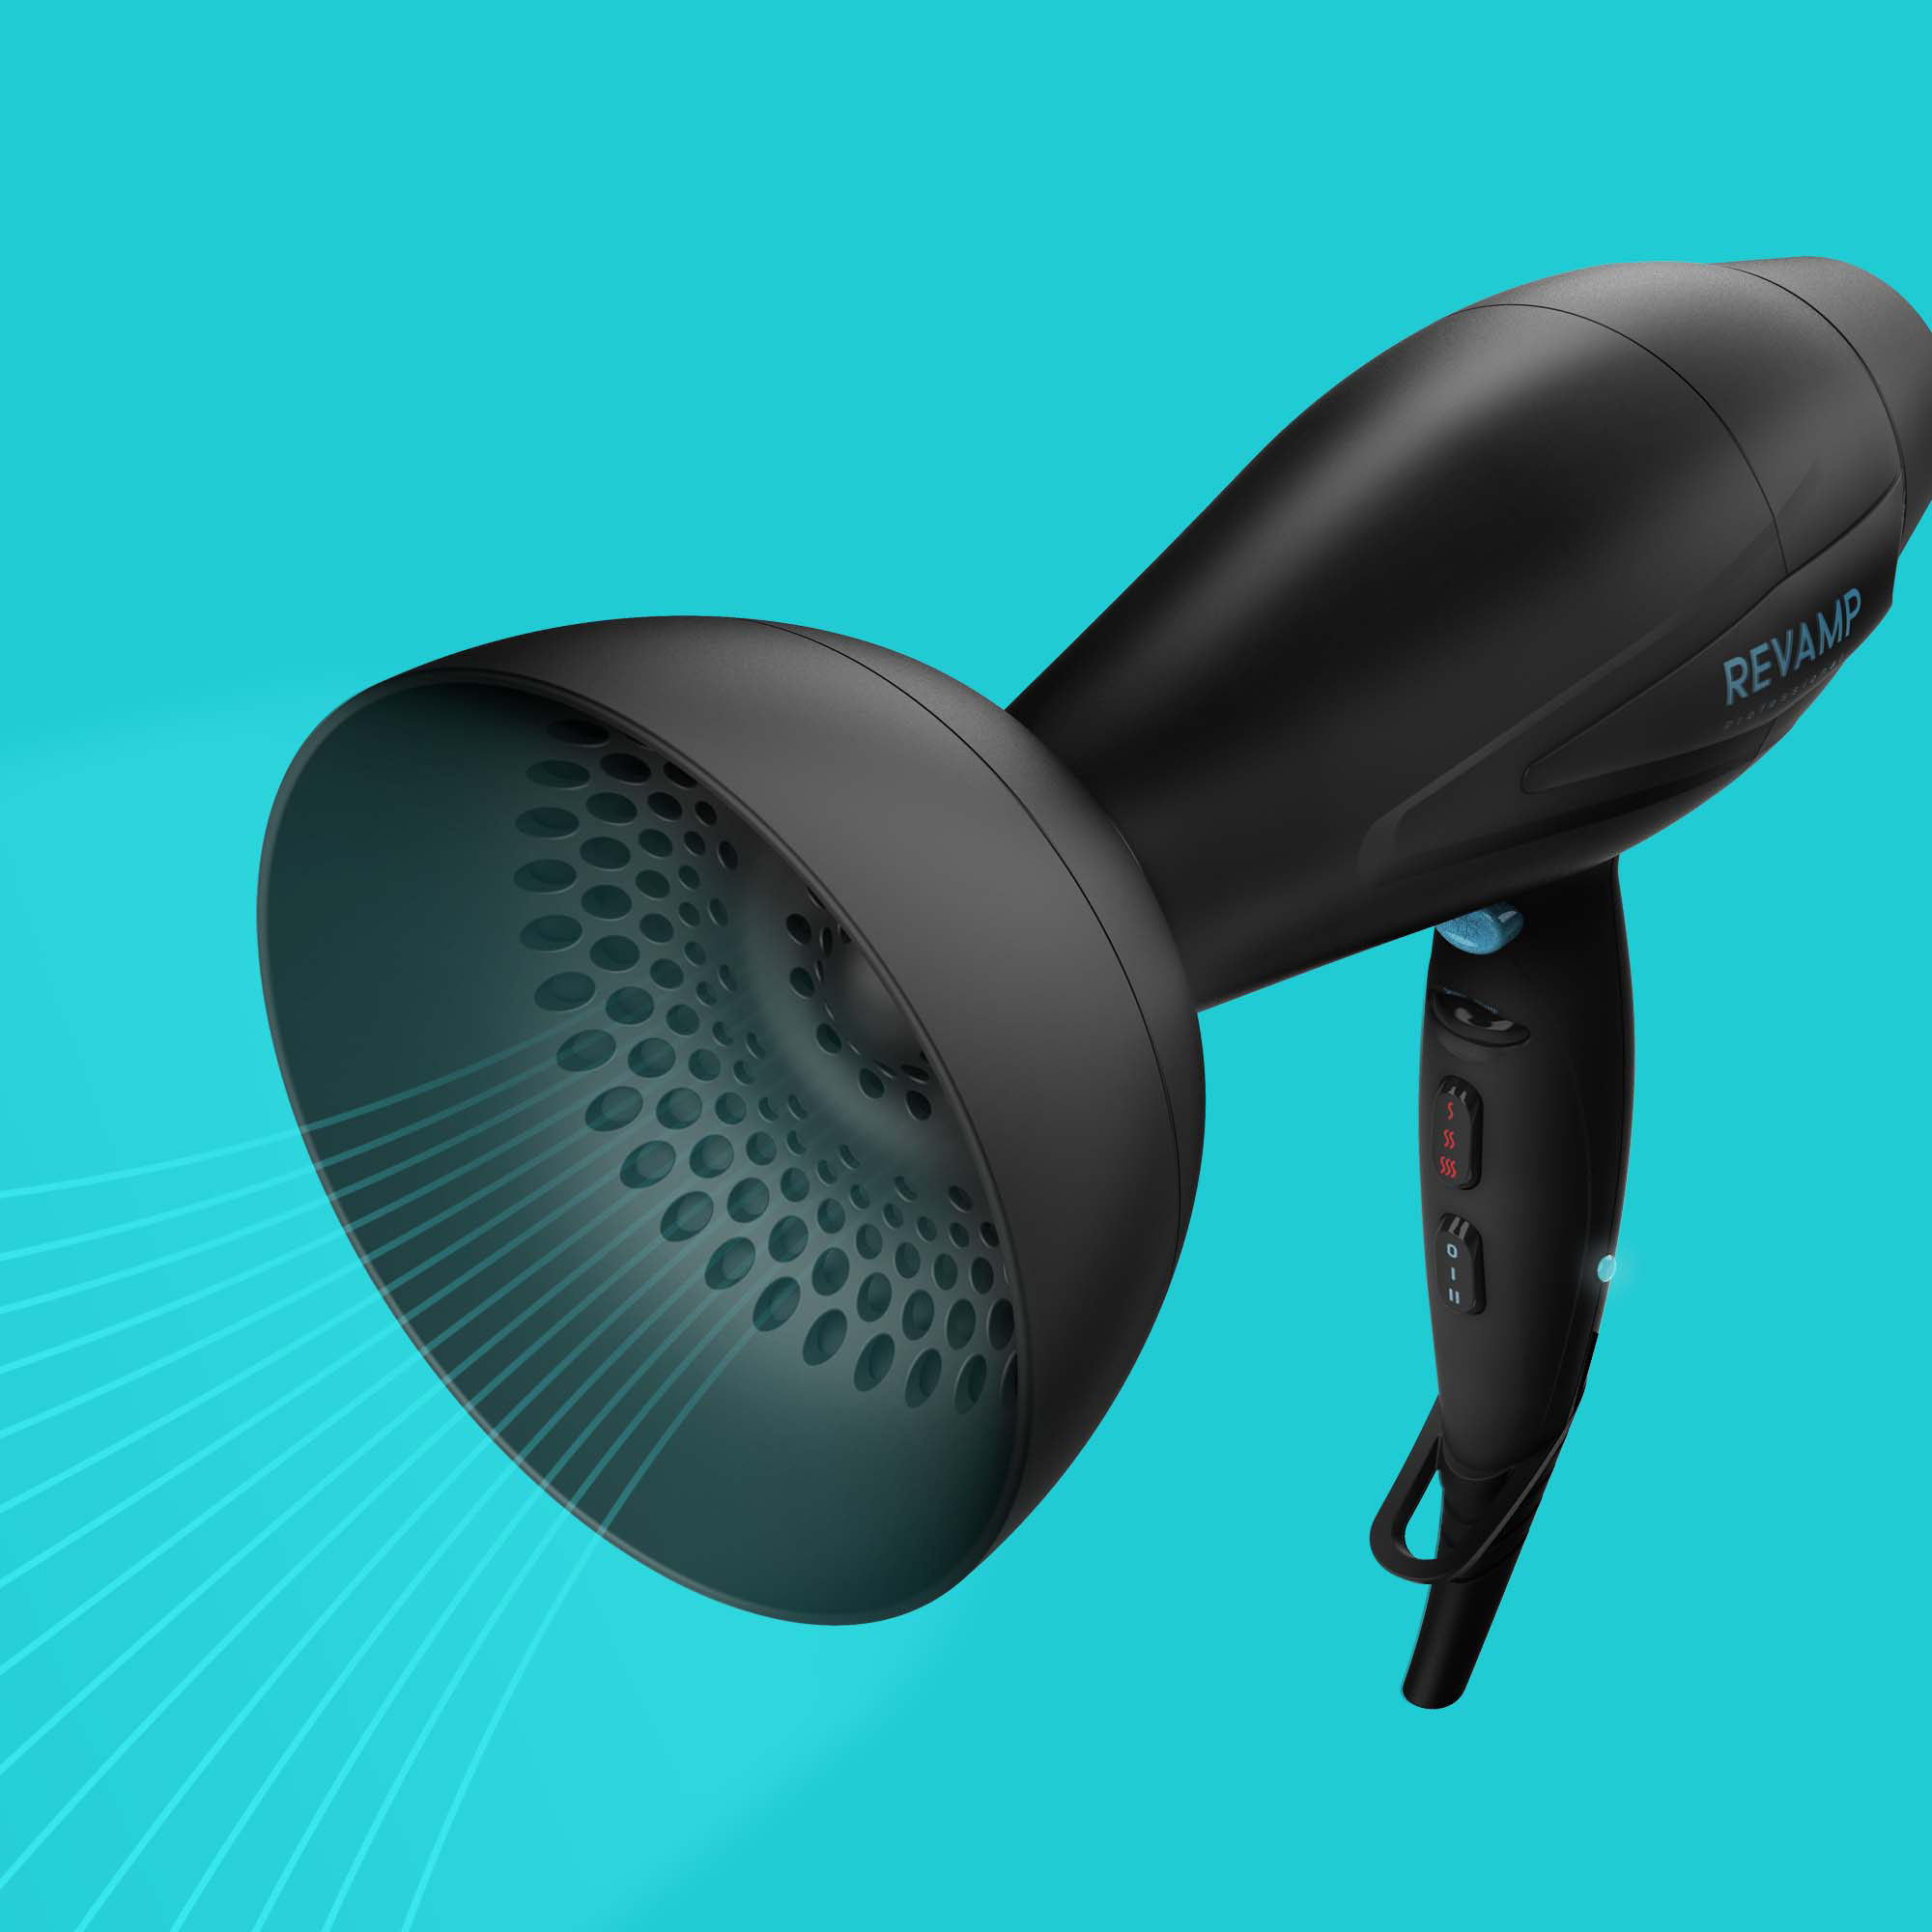 Hair dryer with multiple styling attachments